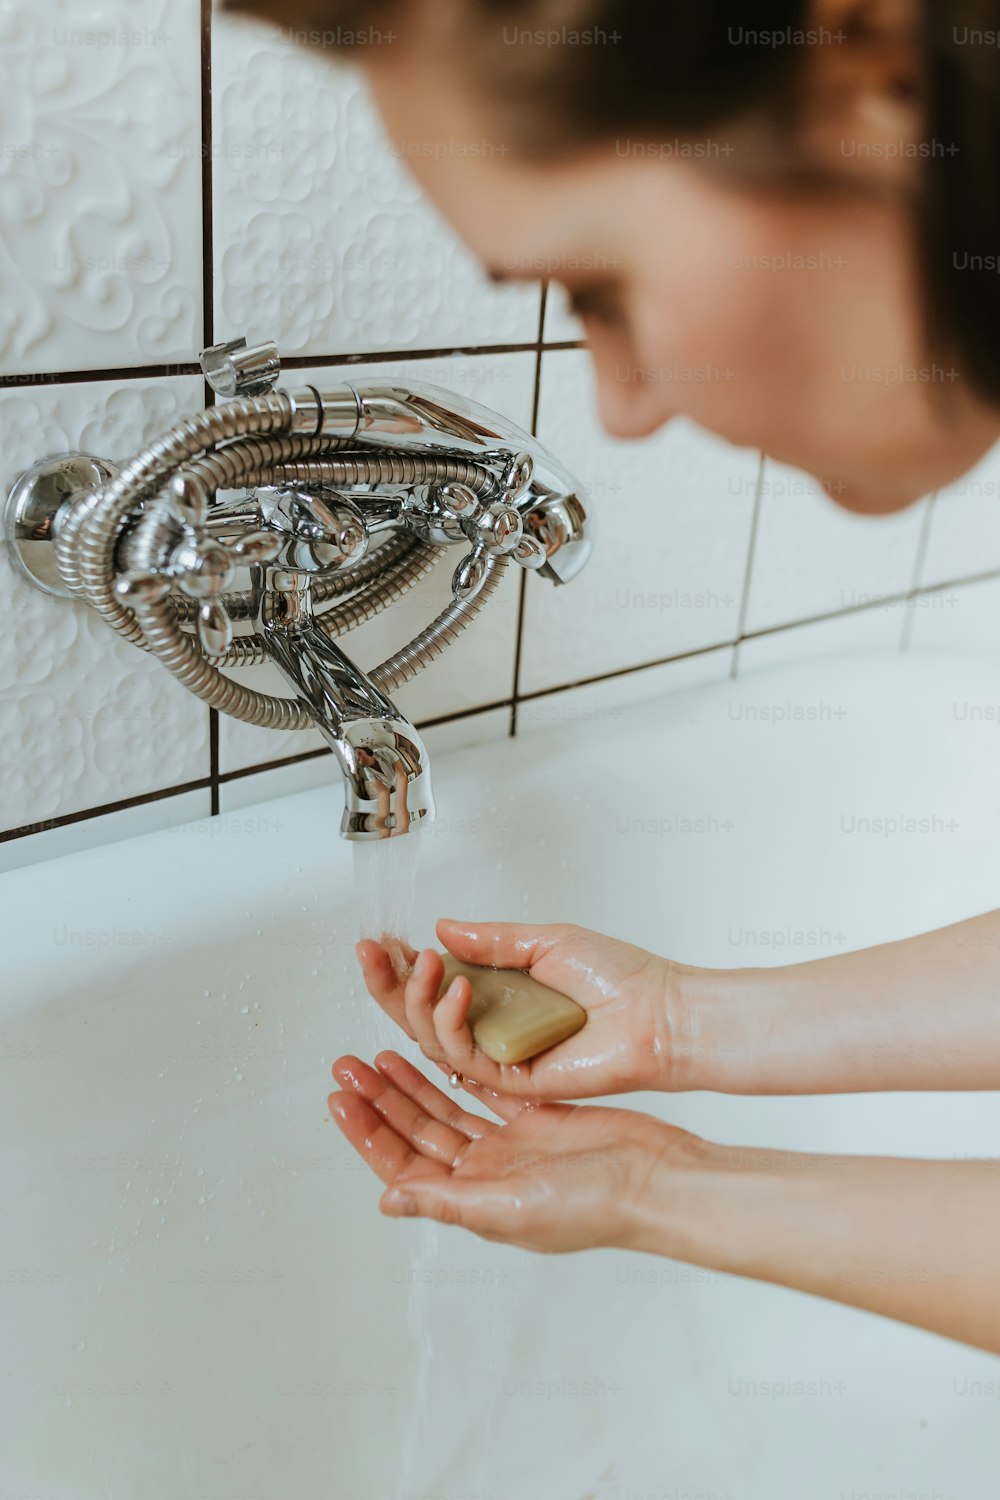 a woman washing her hands under a faucet